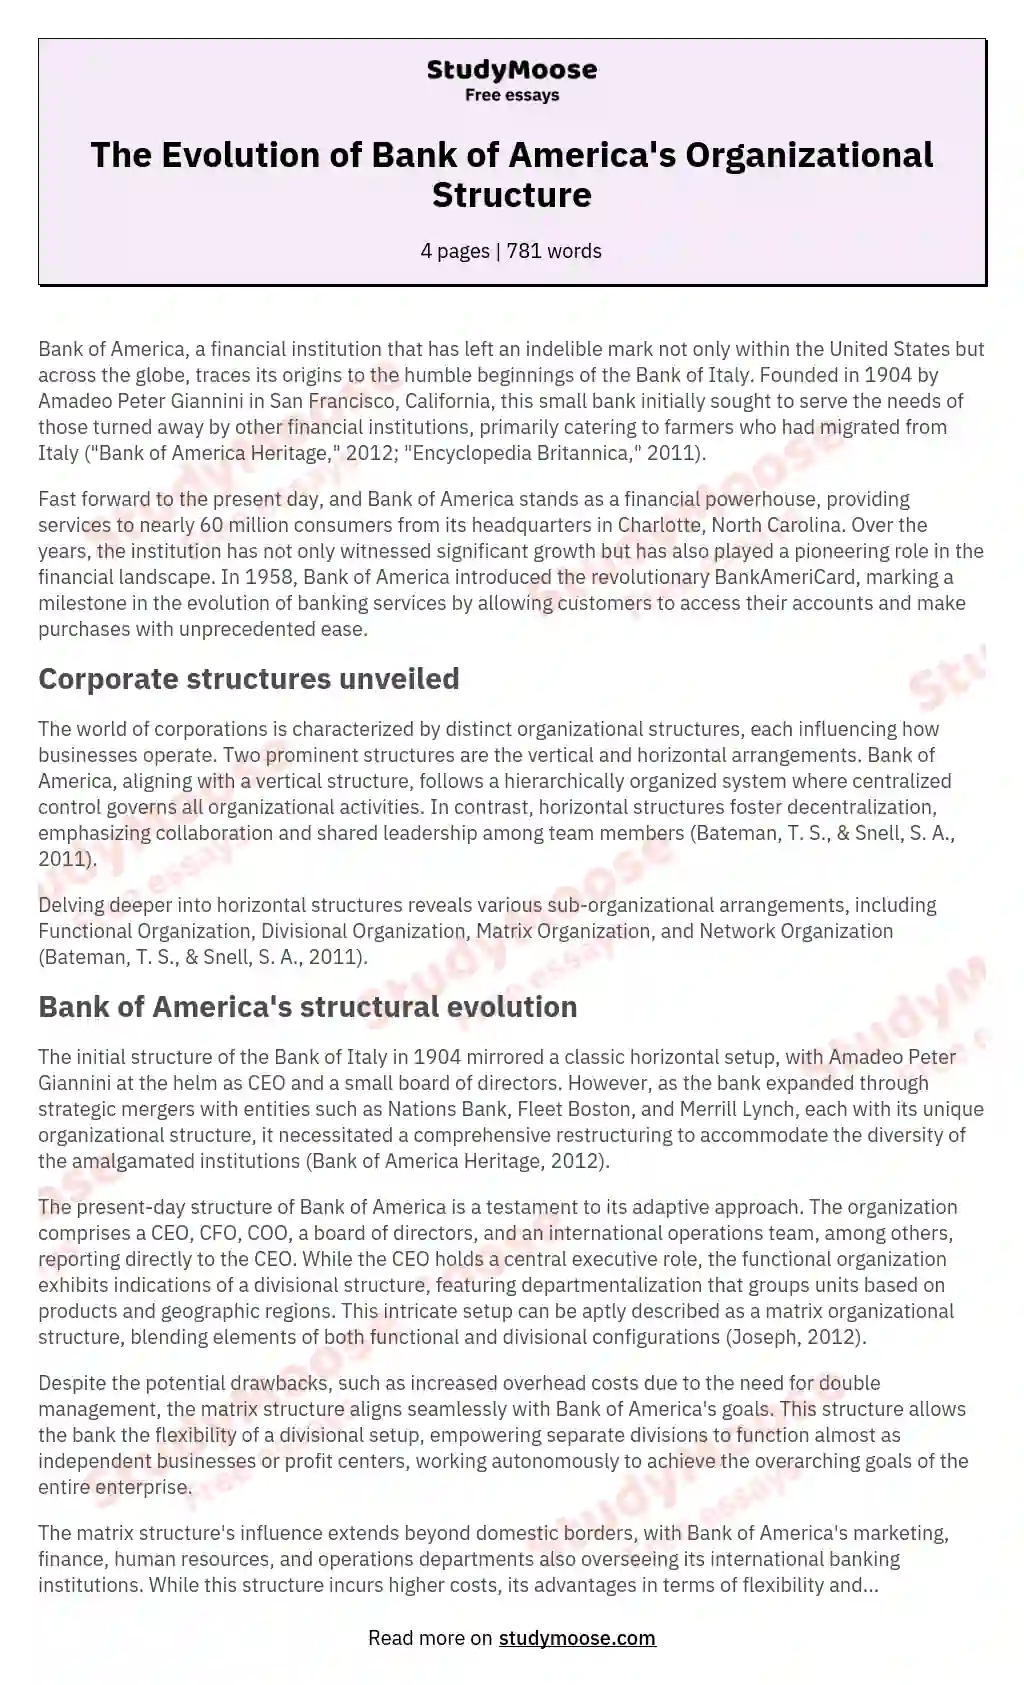 The Evolution of Bank of America's Organizational Structure essay